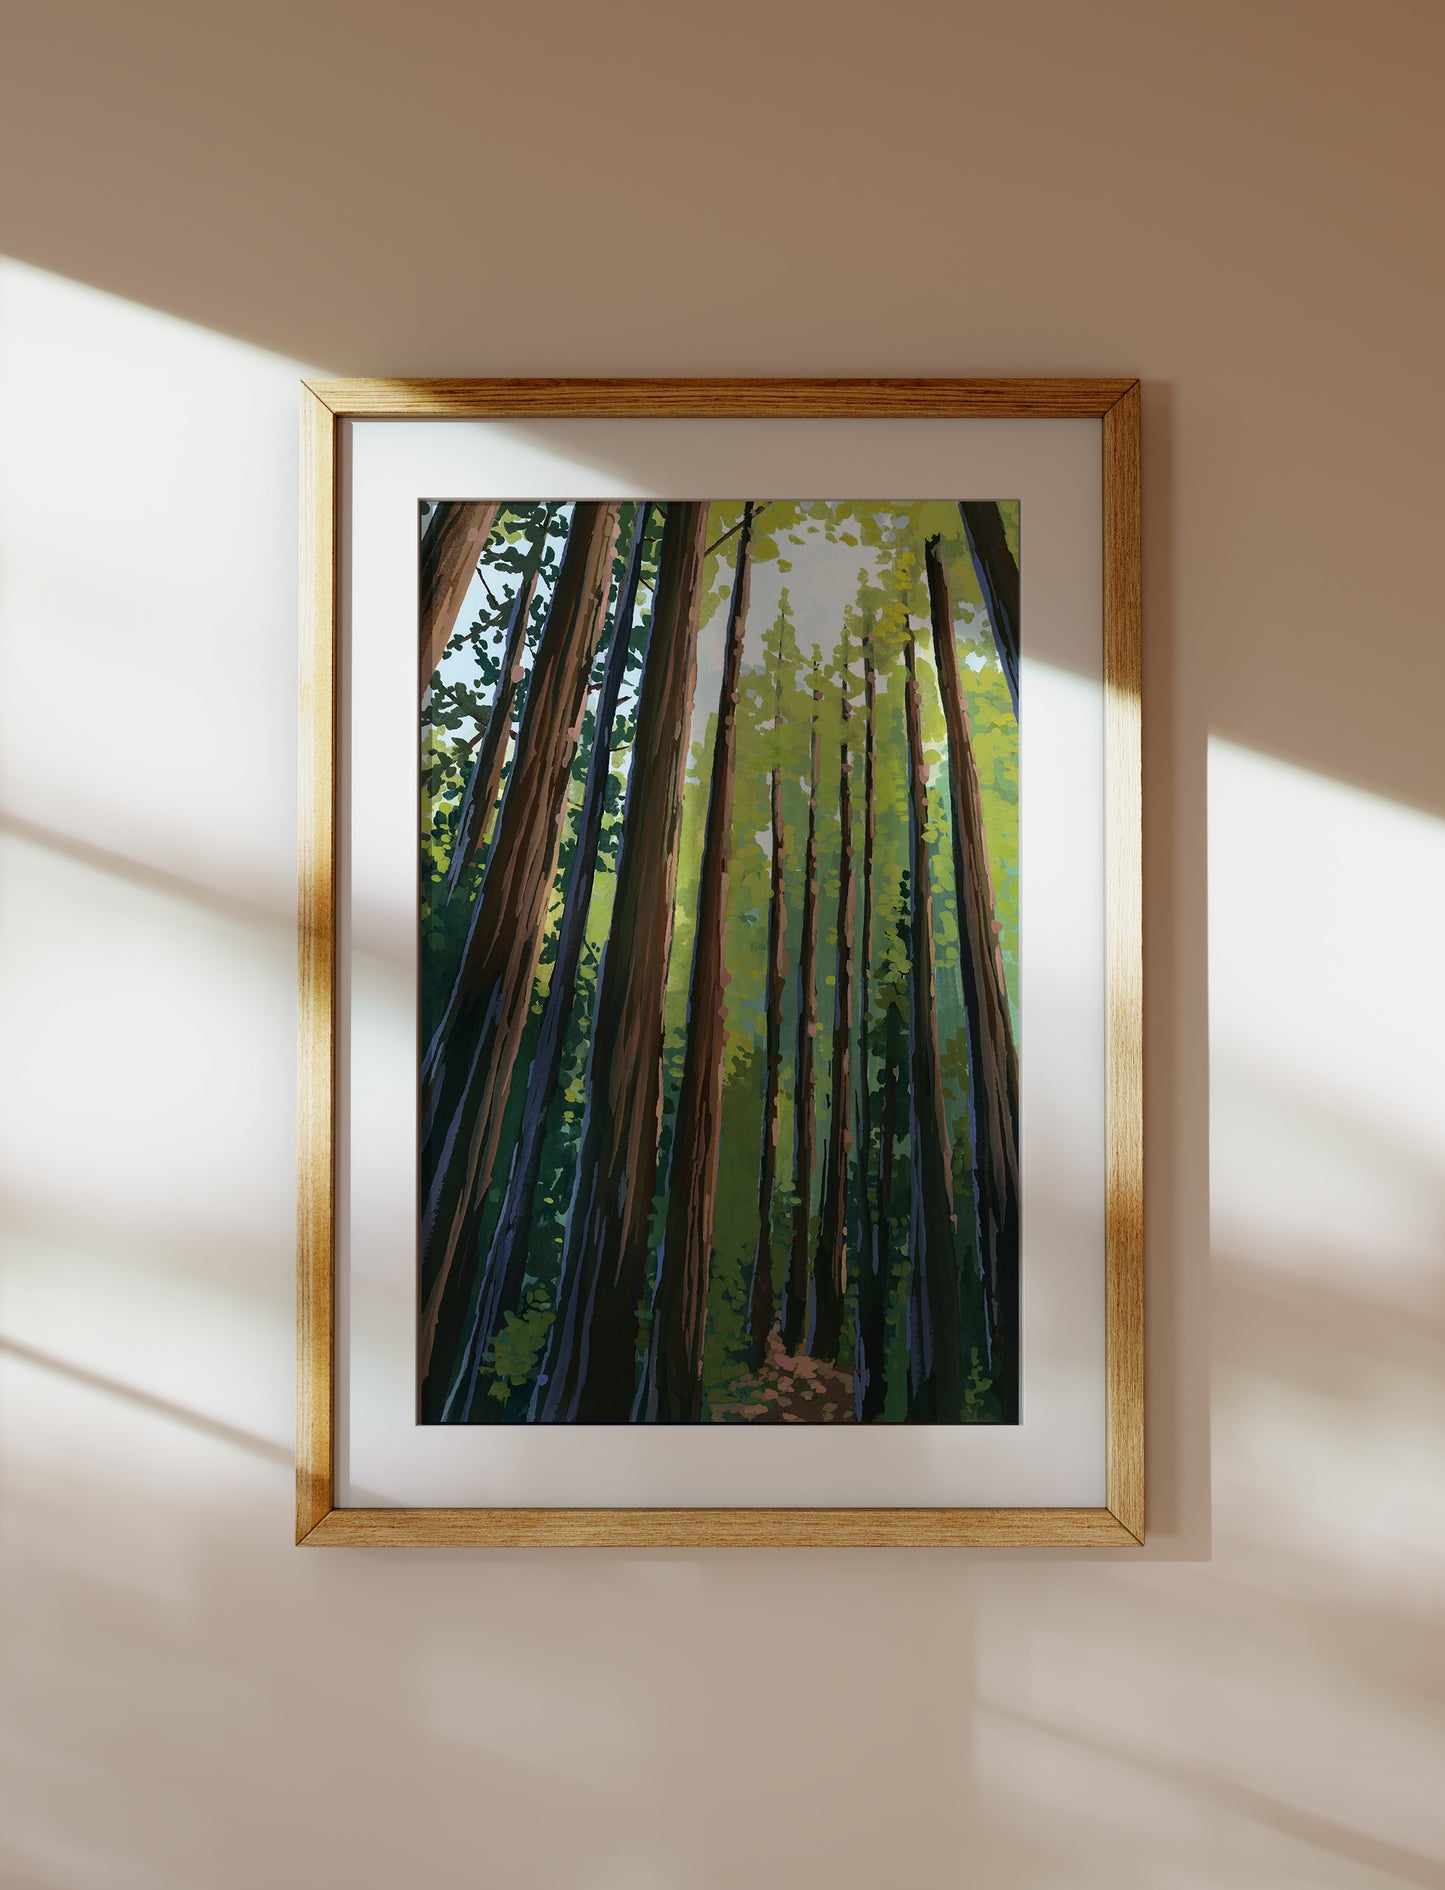 Framed image of 11x17 Art print of redwood trees in California’s Muir Woods National Monument.